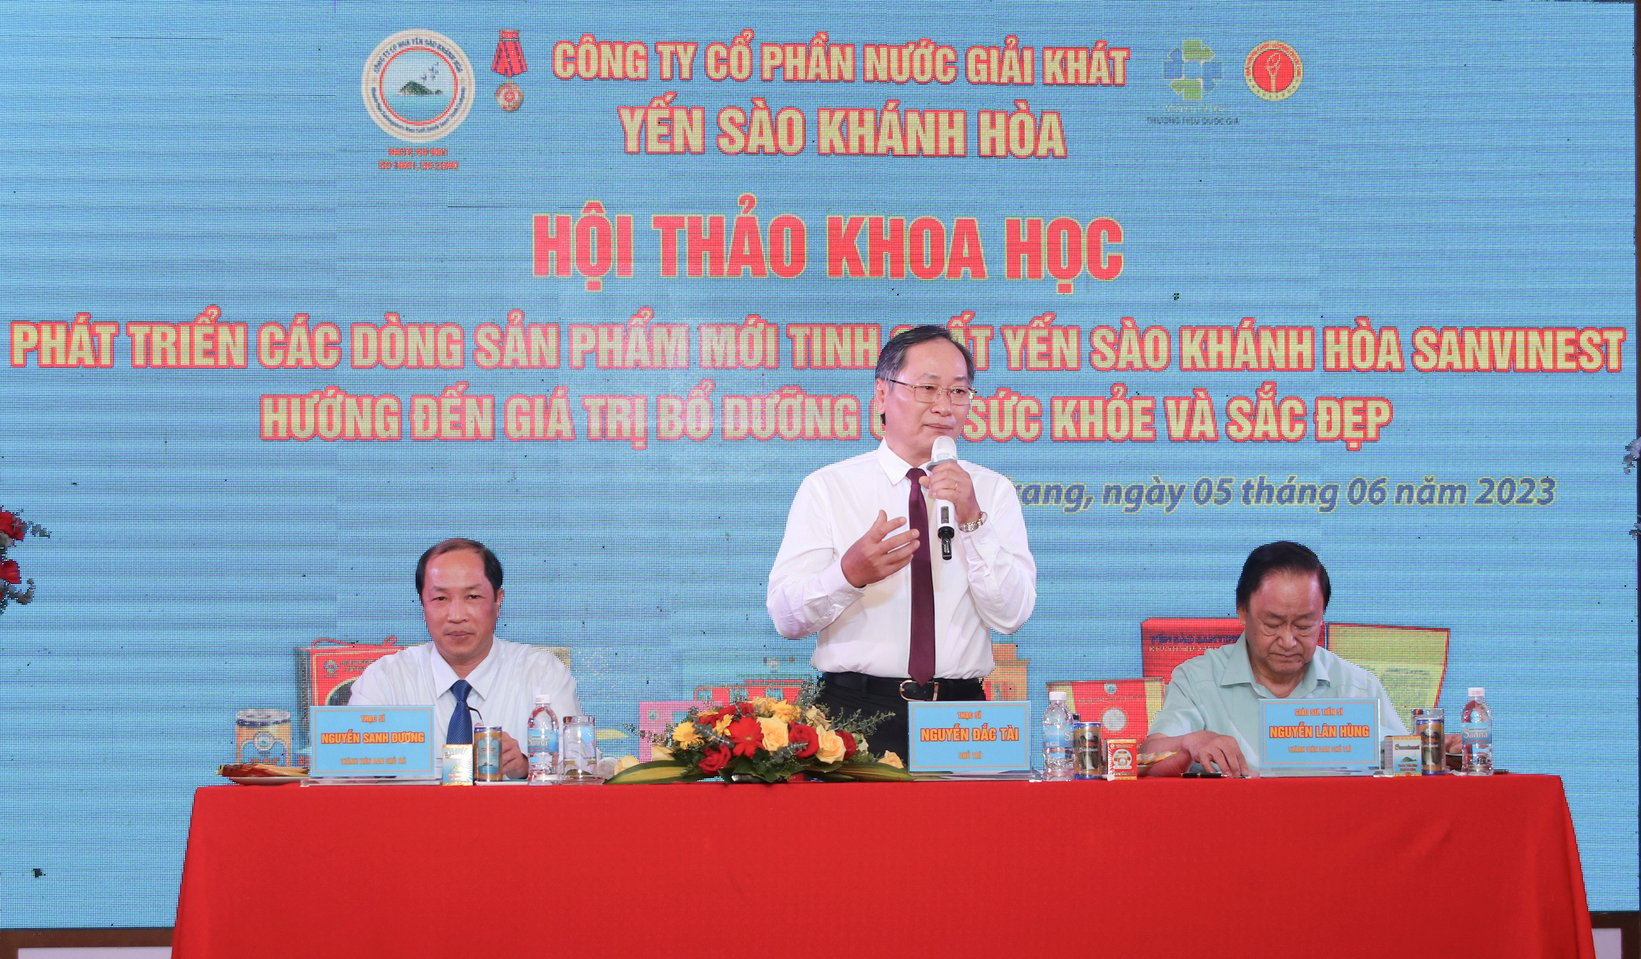 Mr. Nguyen Dac Tai, the Chairman of the Union of Science and Technology Associations of Khanh Hoa province spoke at the workshop. Photo: D.L.